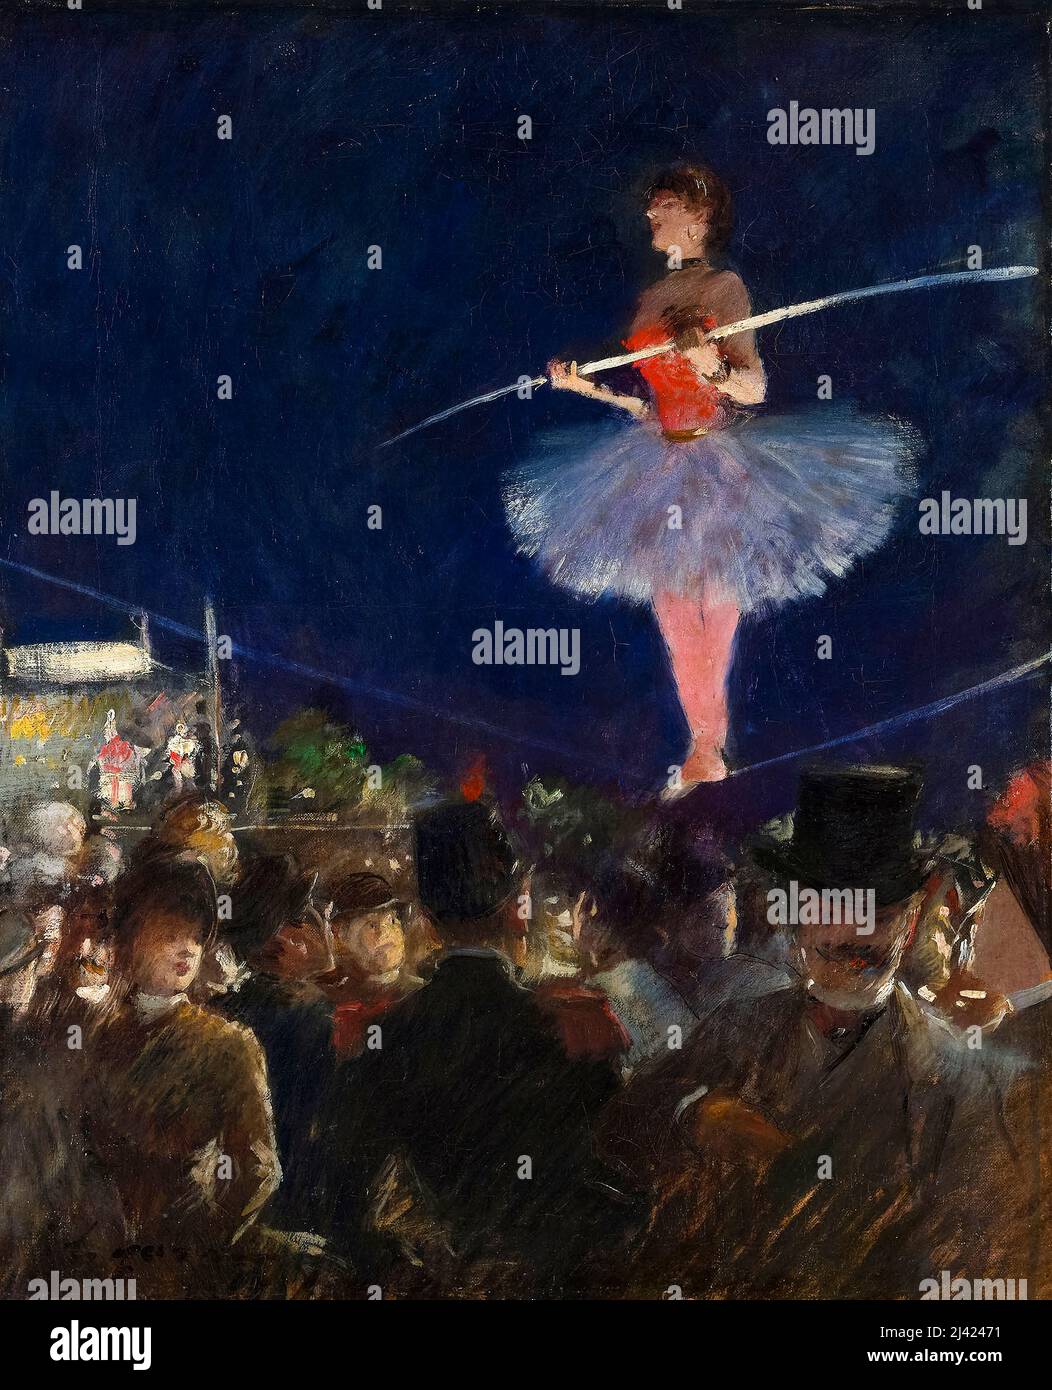 Jean-Louis Forain, Tight-Rope Walker, painting circa 1885 Stock Photo